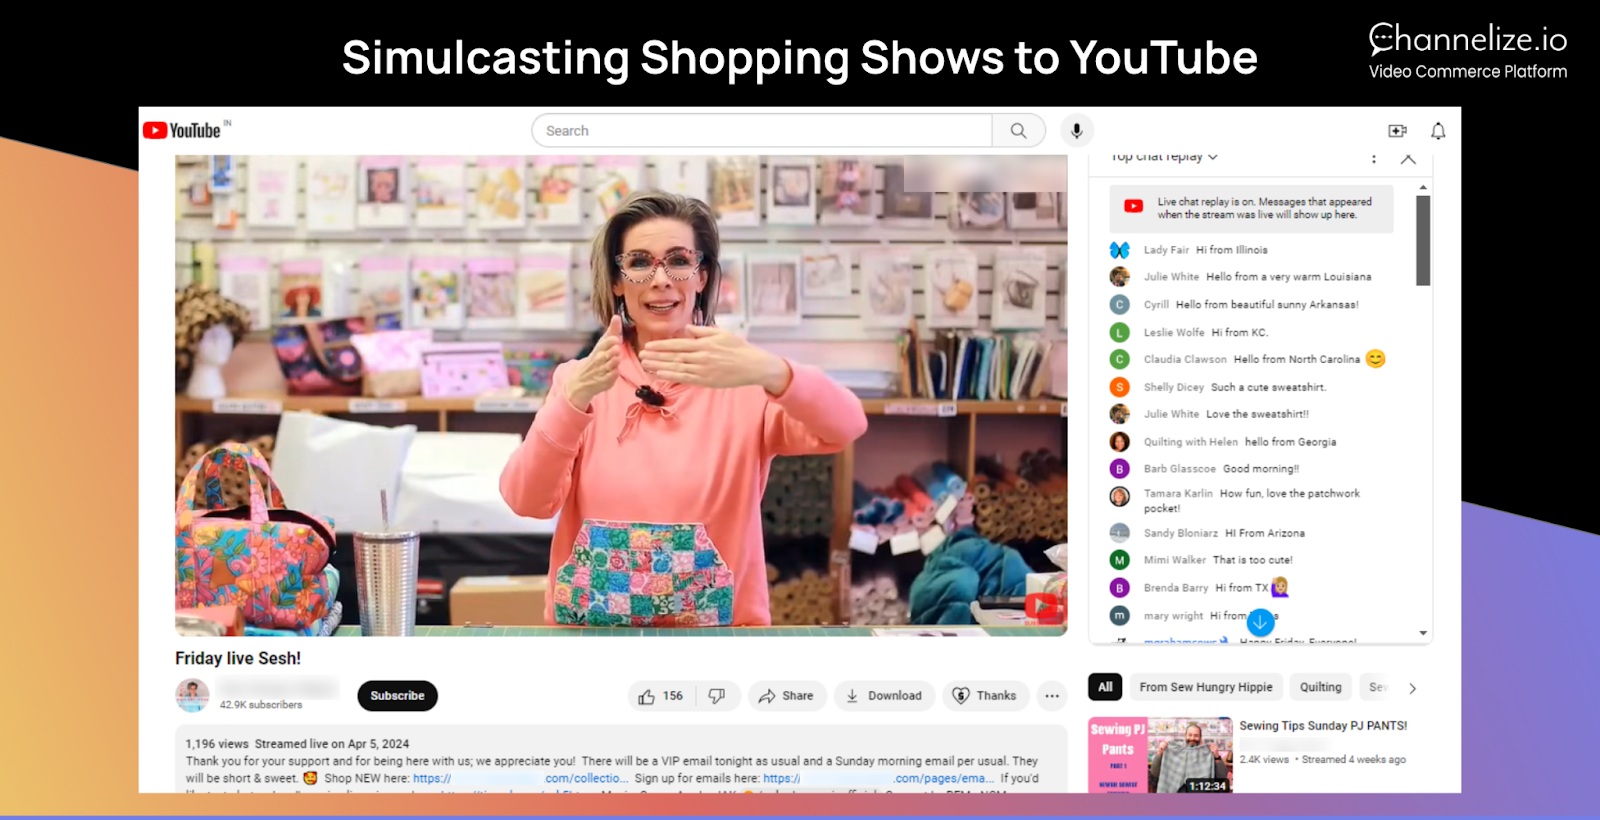 Simulcasting feature of Channelize.io Live Shopping Platform